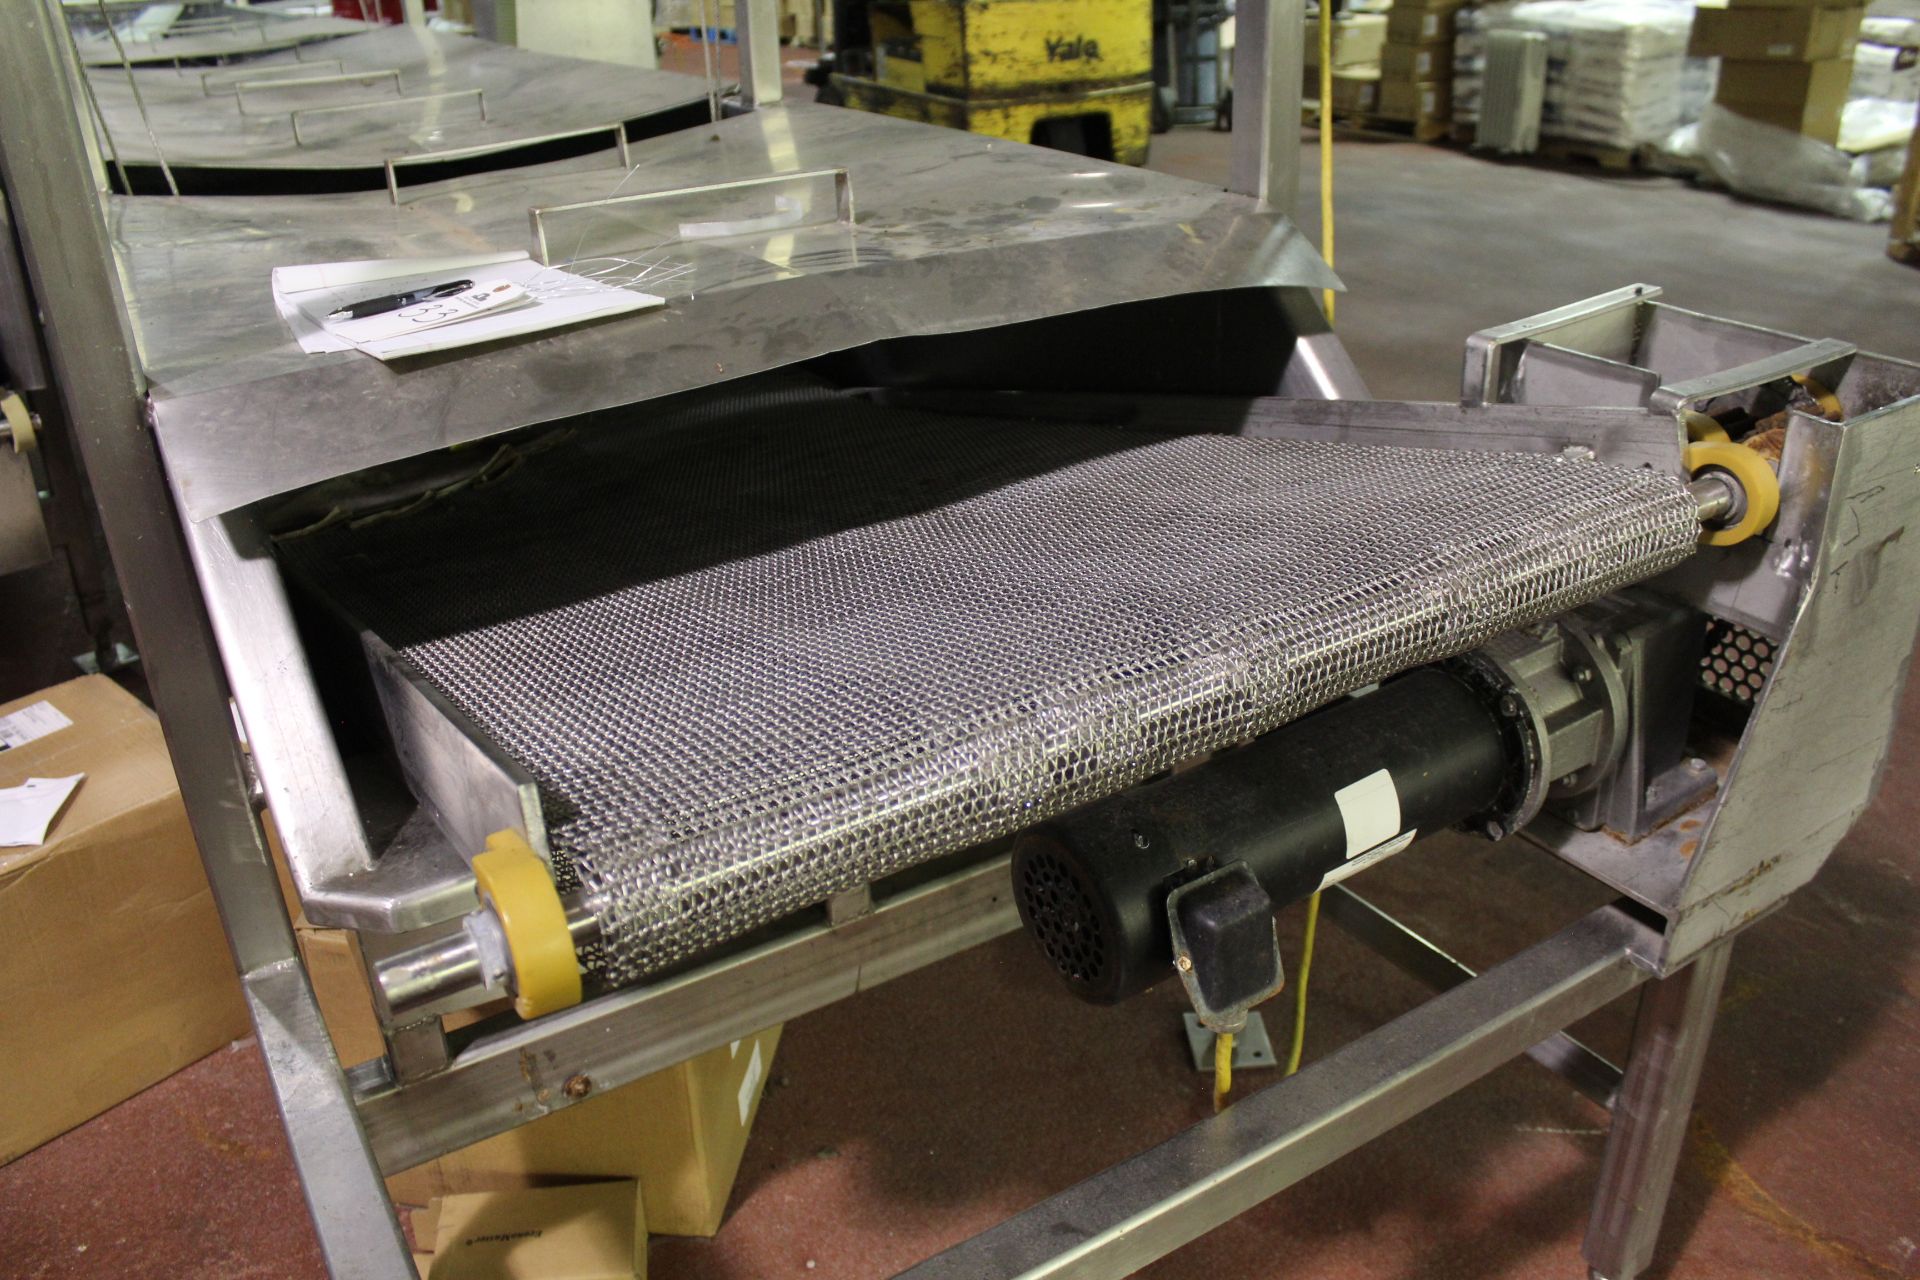 Stainless Steel Continuous Submersion Cooking Conveyor with Top Hold Down Belt, 30" Belt, 35"W X 23" - Image 2 of 4